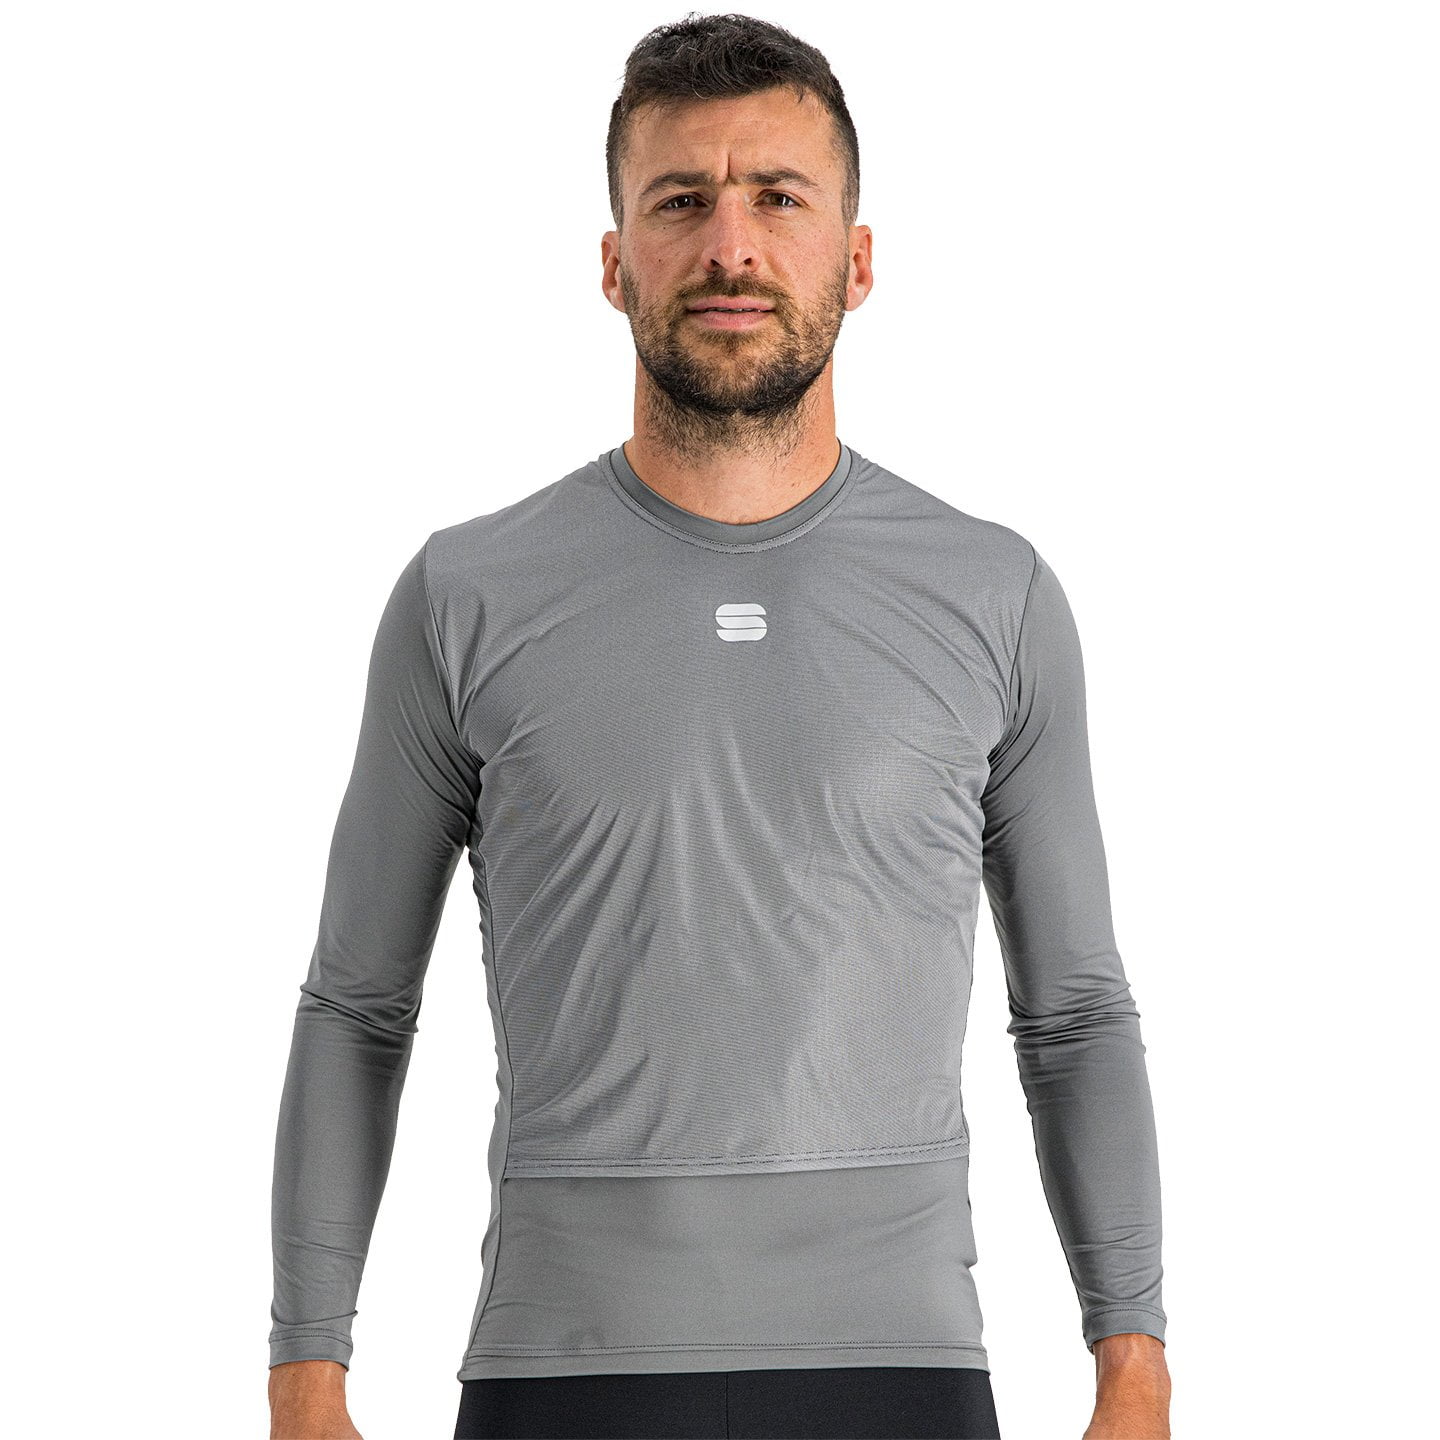 Sportful Fiandre Thermal Long Sleeve Cycling Base Layer Base Layer, for men, size L, Singlet, Cycle clothing